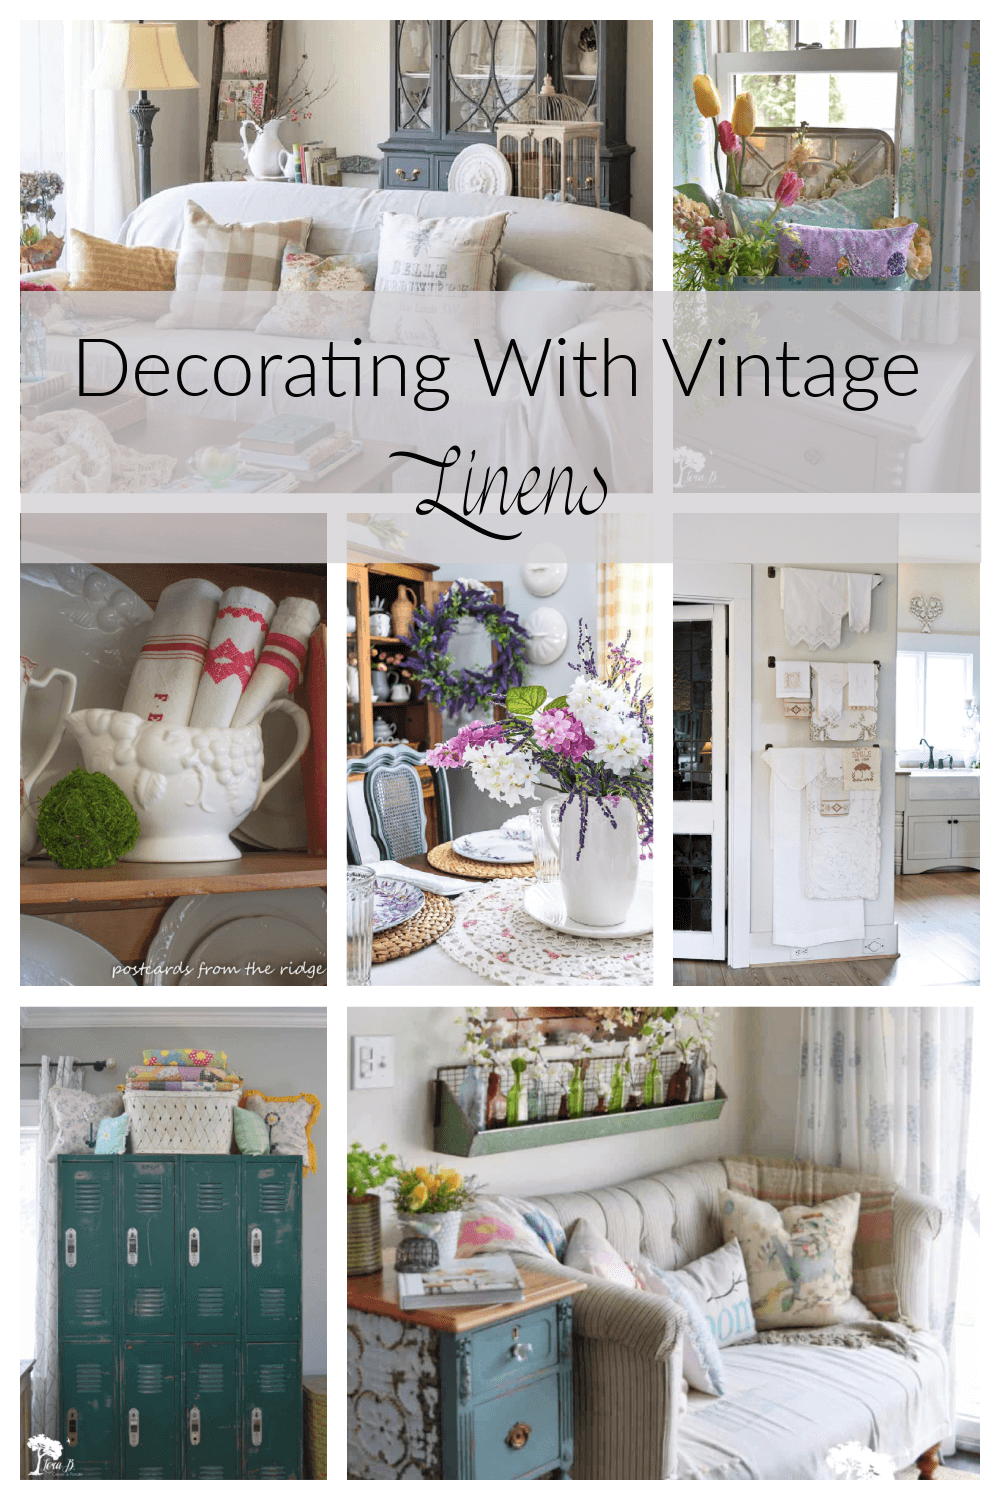 Repurposing & Decorating With Vintage Linens